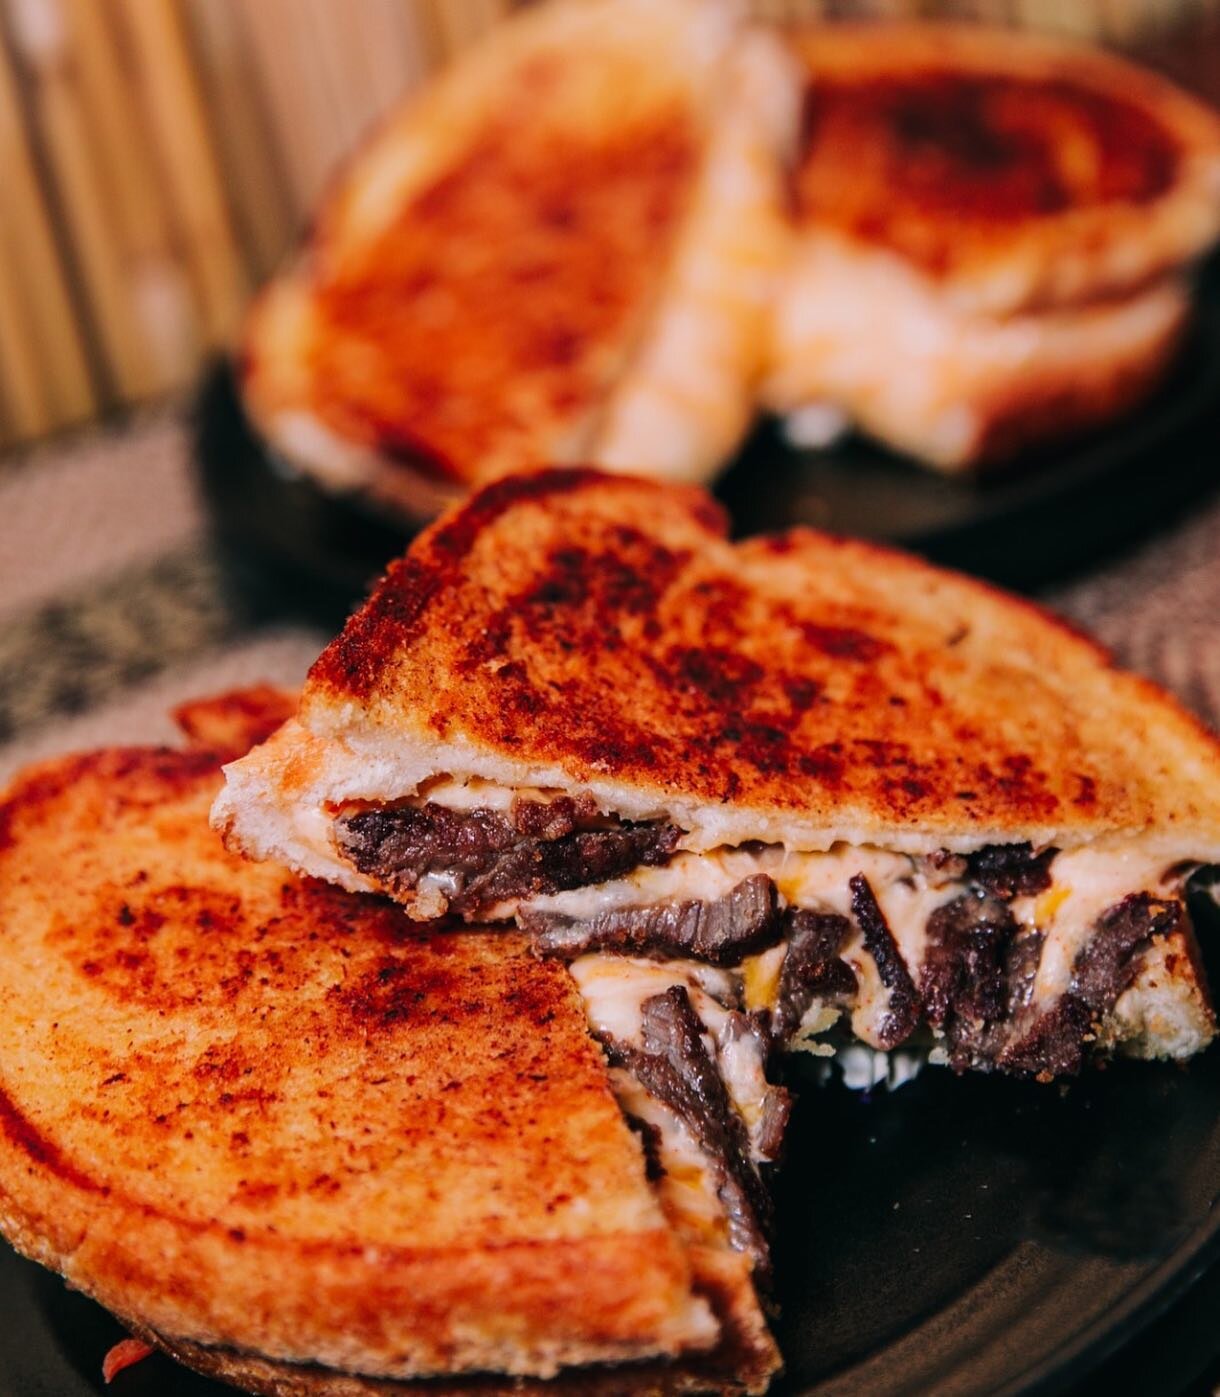 You&rsquo;ll melt over our new lunch menu! 🤤

Our lunch menu is finally out and already you guys can&rsquo;t get enough of our garlic beef toastie packed with our blend of cheddar, mozzarella, Monterey Jack, cream cheese and Thai curry butter (it&rs